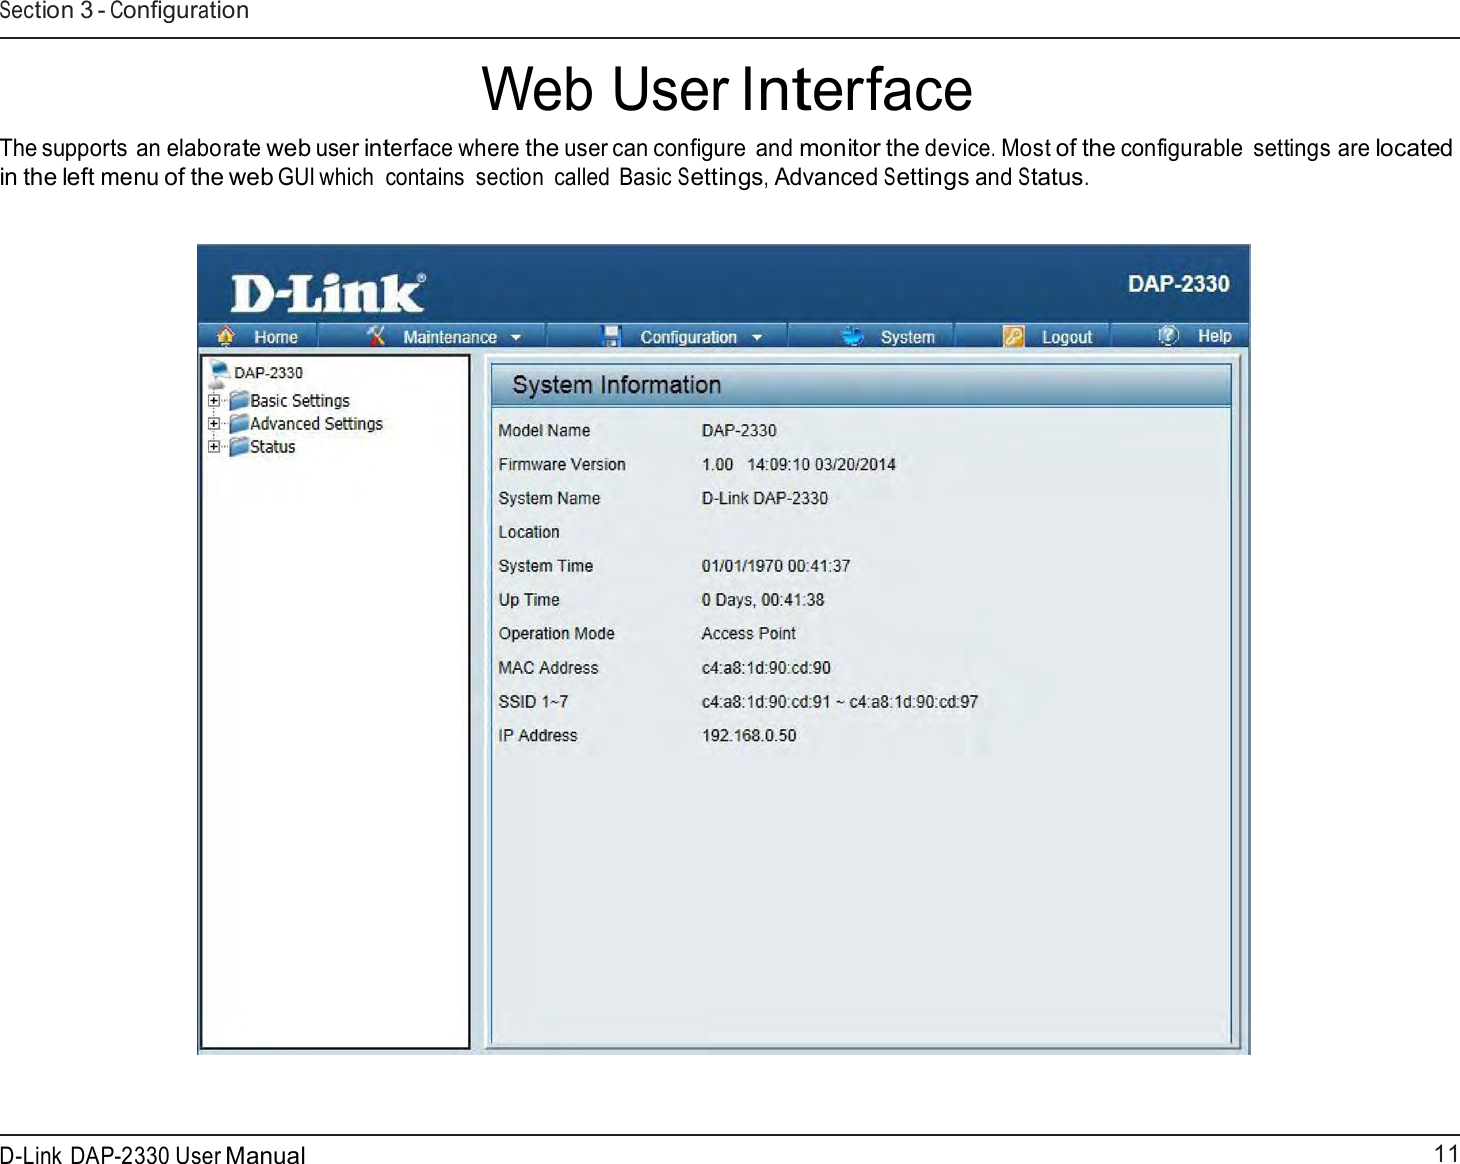 11 D-Link DAP-2330 User ManualSection 3 - Configuration     Web User Interface  The supports an elaborate web user interface where the user can configure and monitor the device. Most of the configurable  settings are located in the left menu of the web GUI which  contains  section  called  Basic Settings, Advanced Settings and Status.     